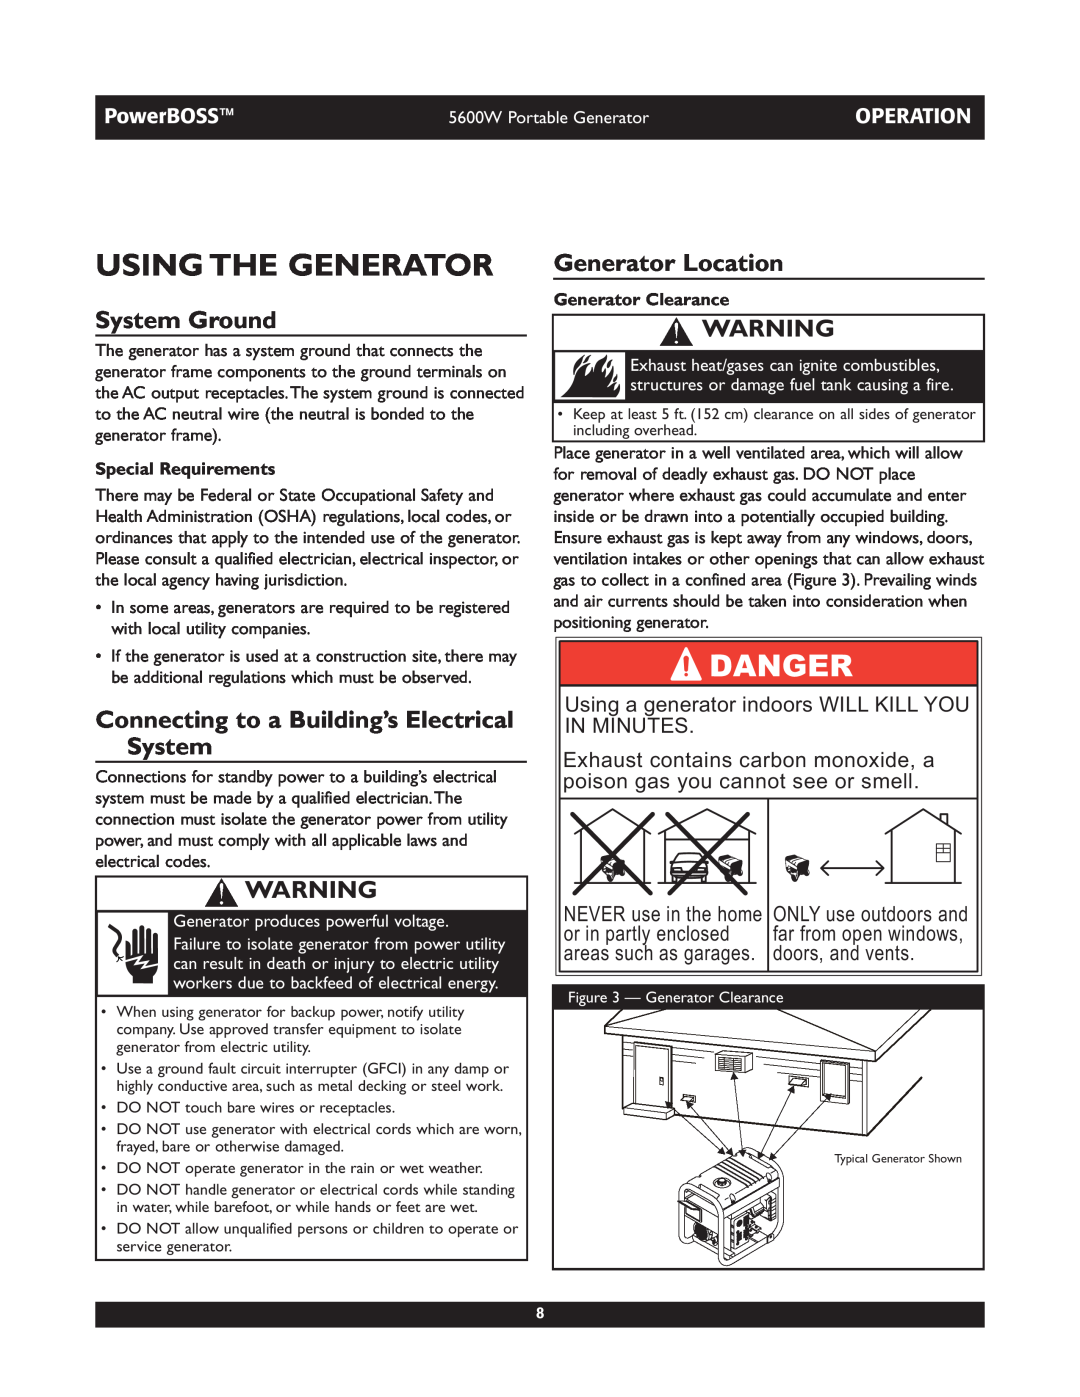 Briggs & Stratton 30230 manual Using The Generator, System Ground, Connecting to a Building’s Electrical System, Operation 